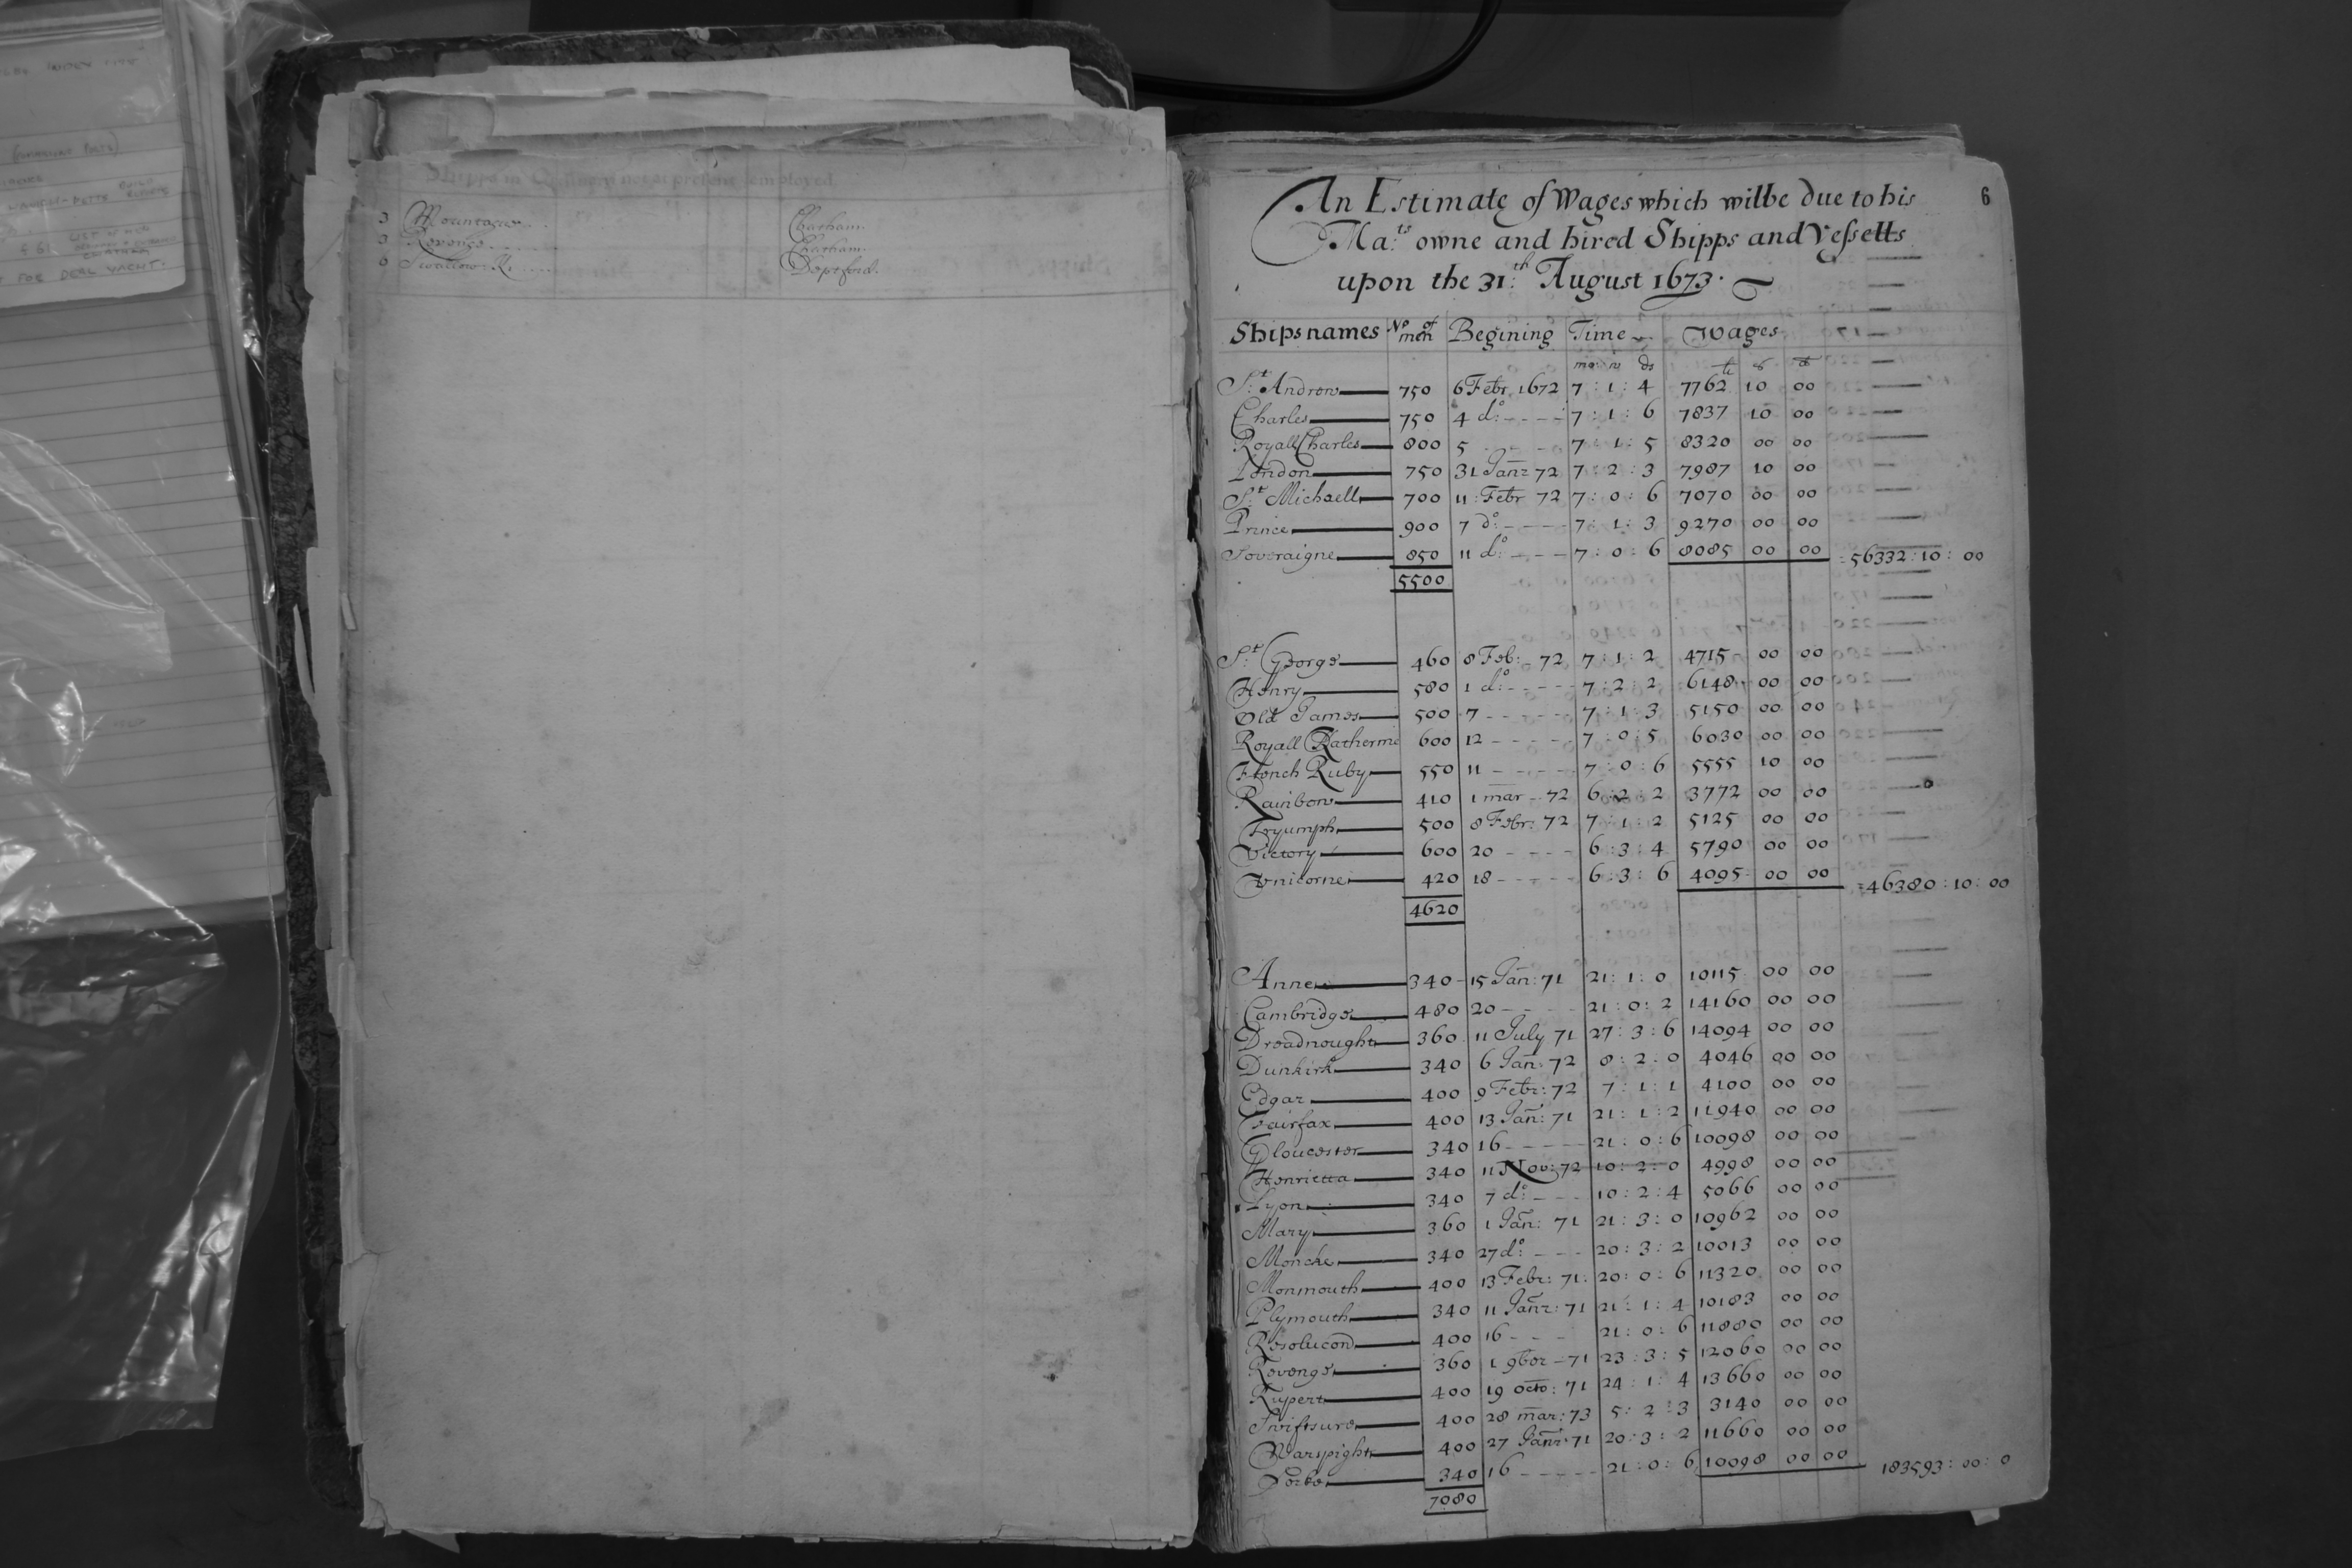 A black and white image of ADM 8 volume 1, with a blank page on the left and the first page of a Wages/Service Time report on the right.